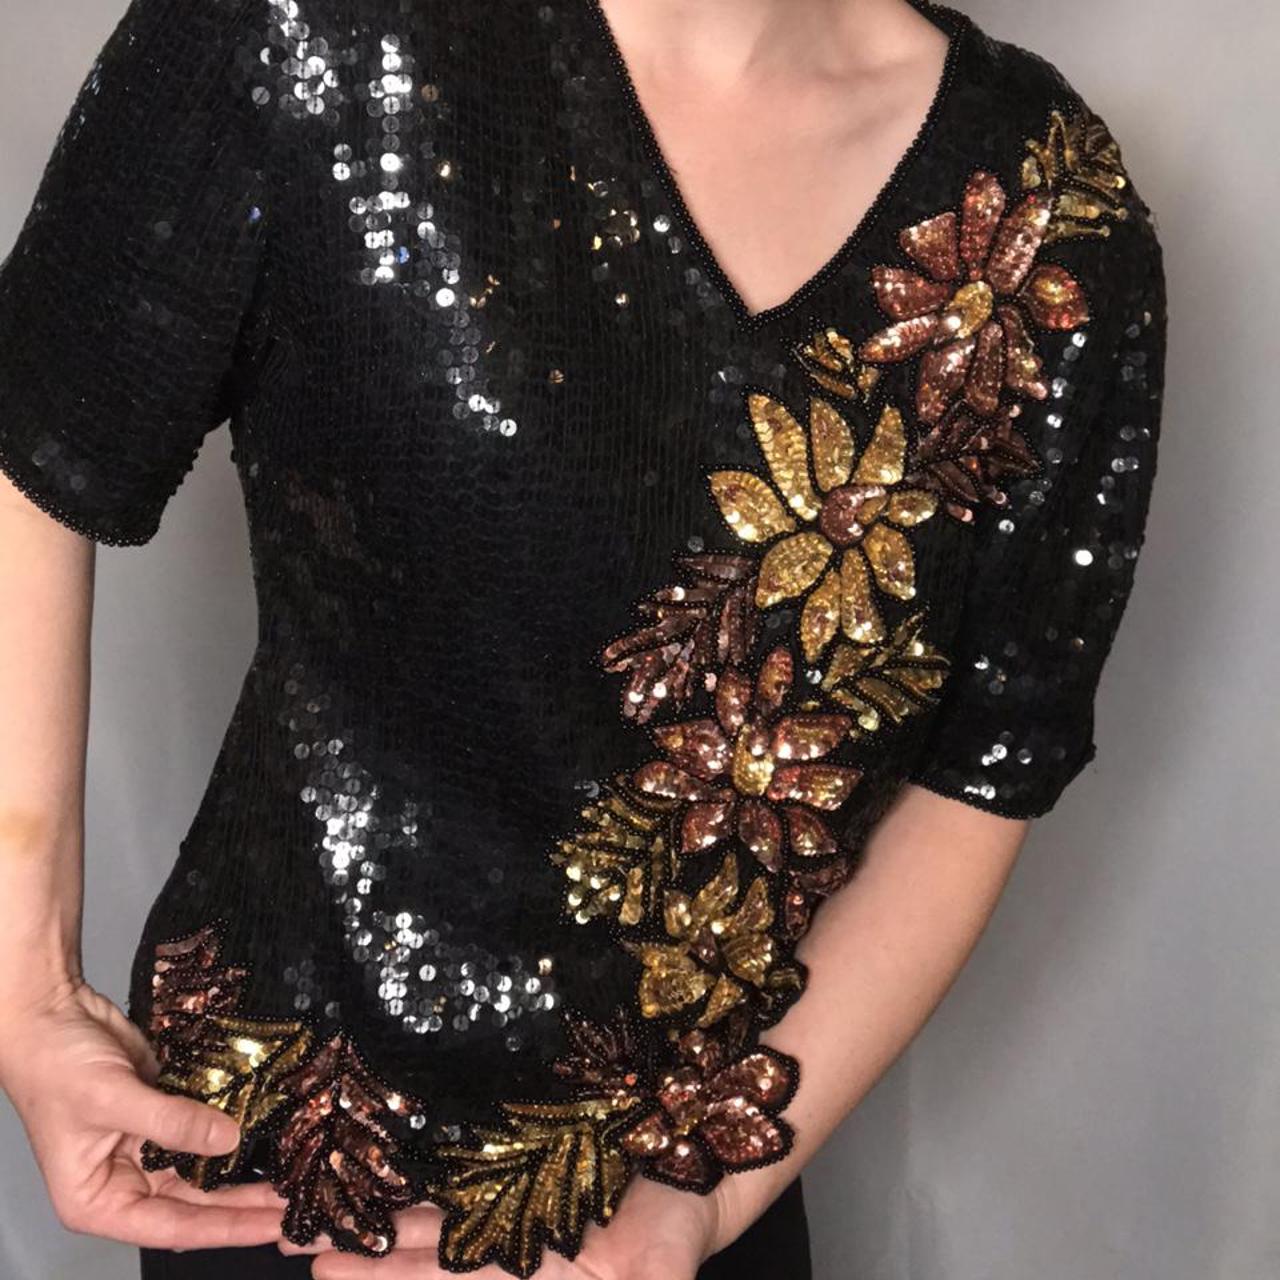 American Vintage Women's Black and Gold Top